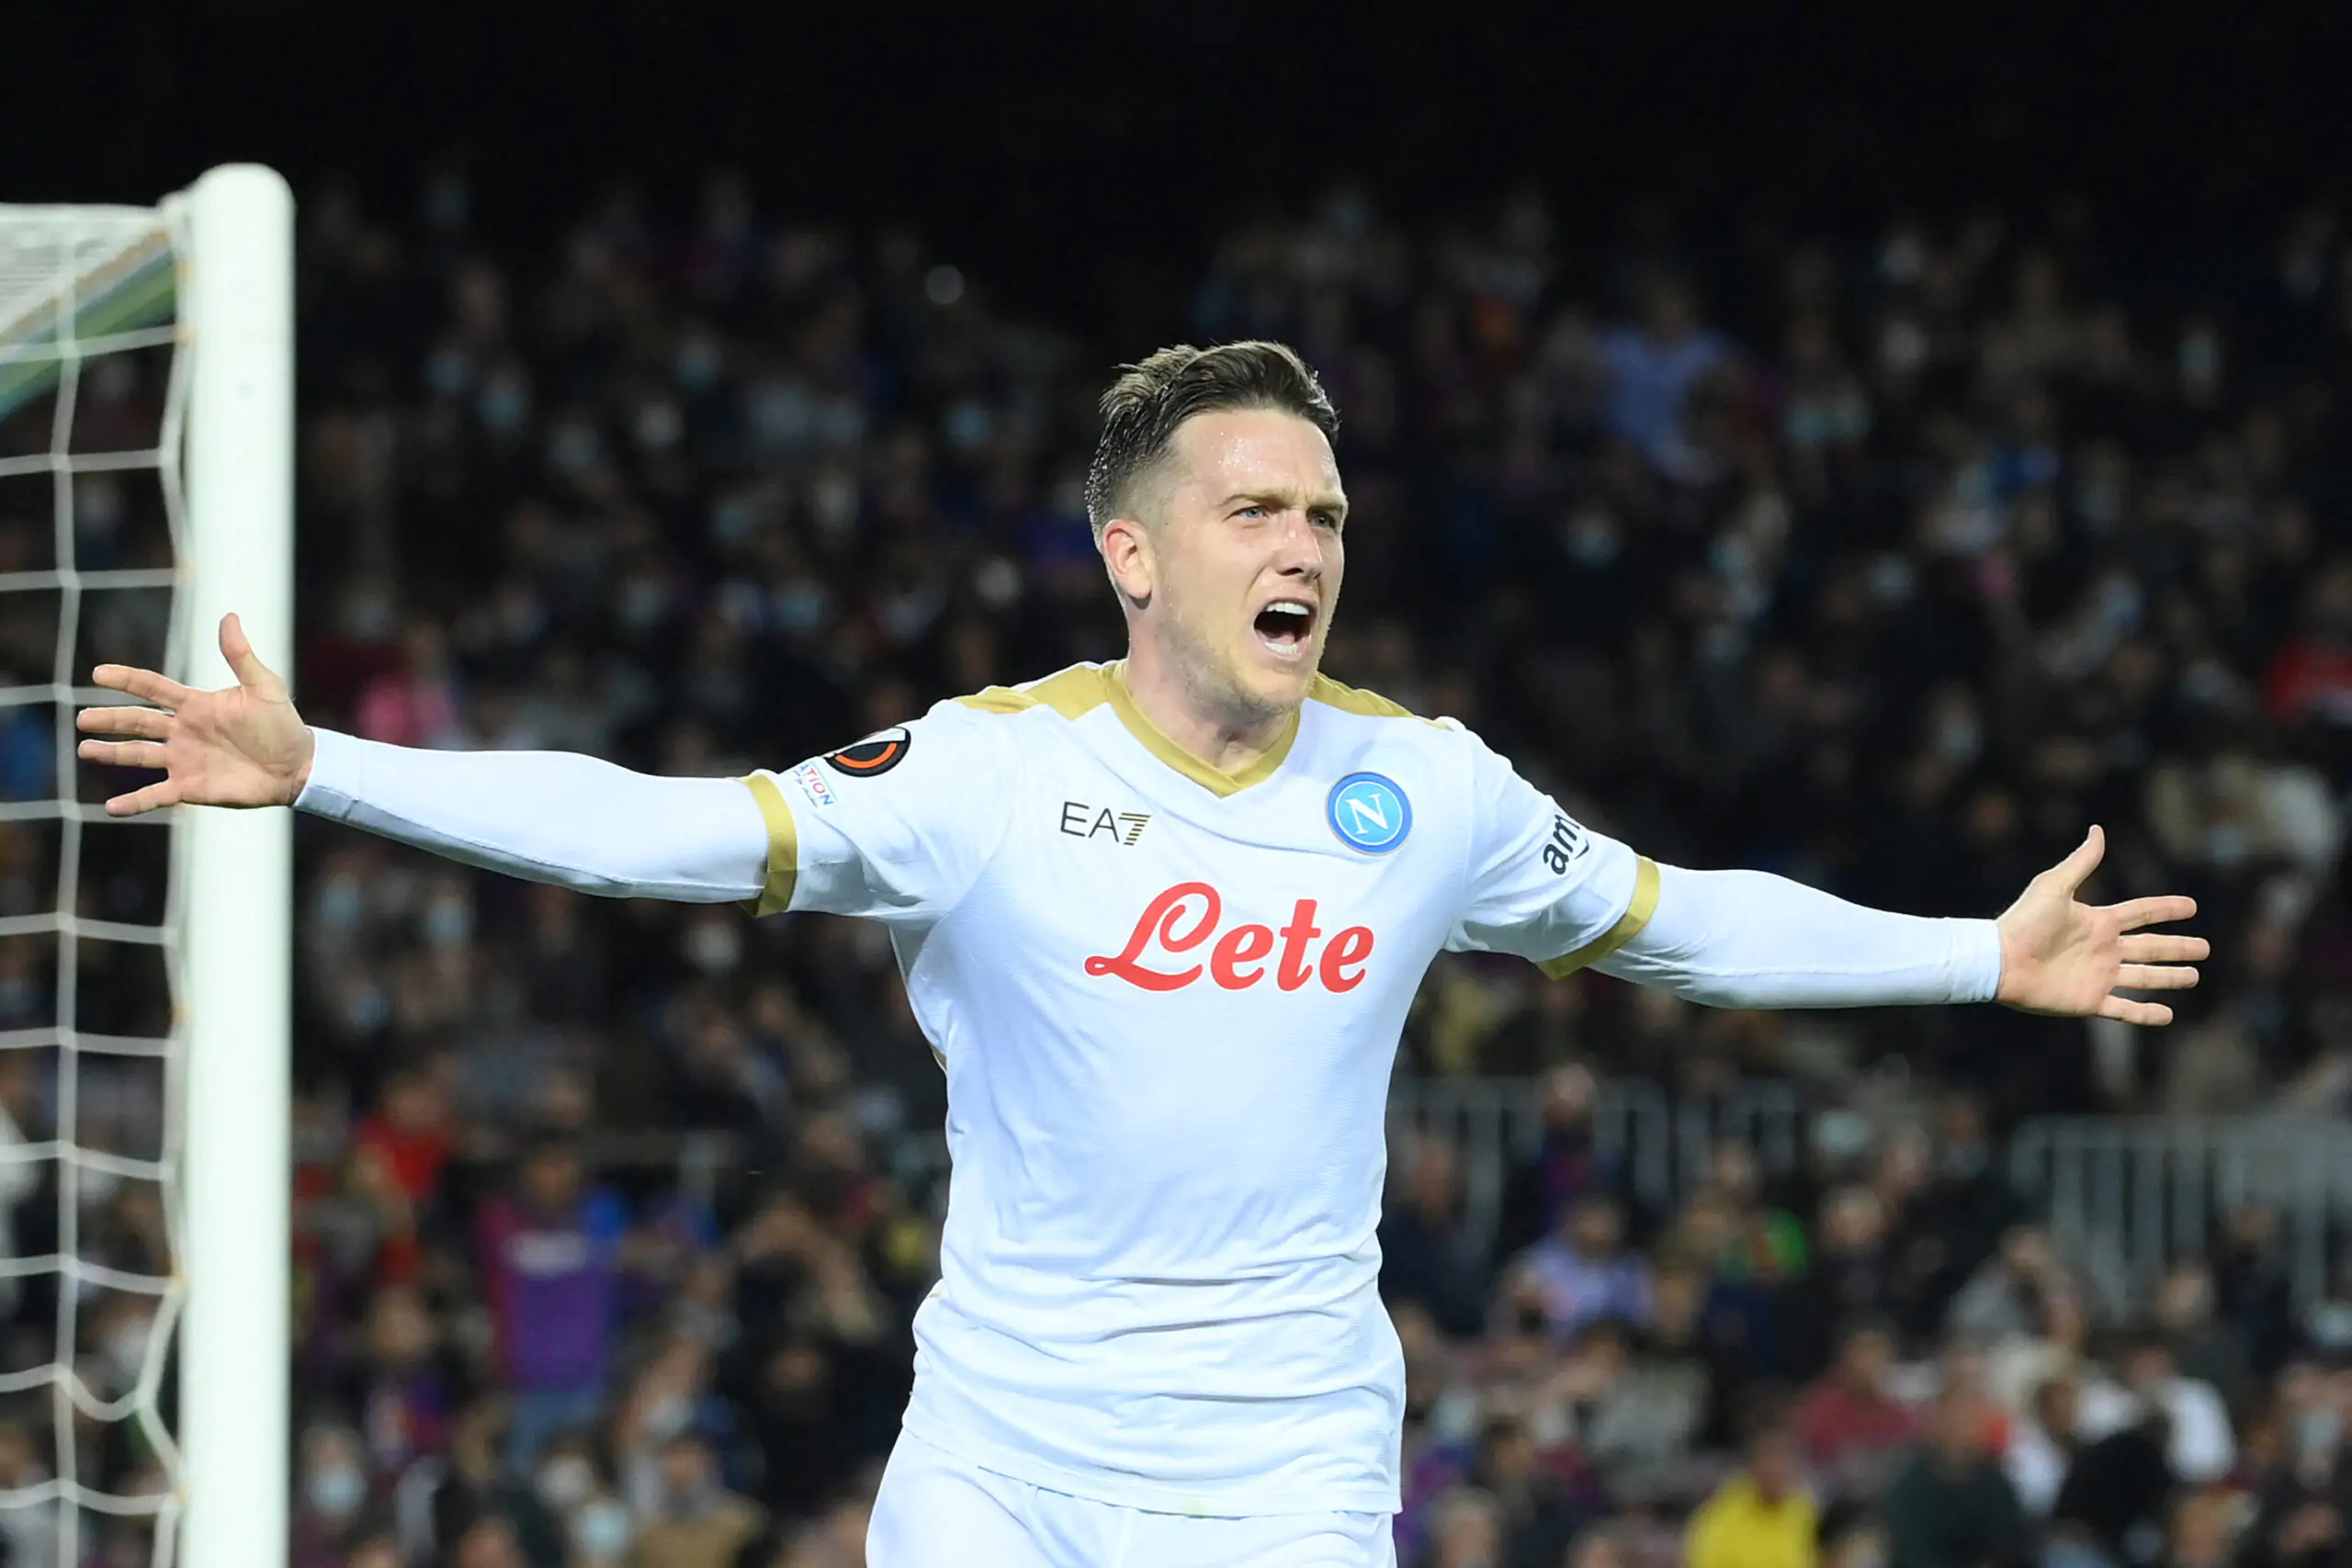 Despite the ties with Juventus' director Cristiano Giuntoli, Inter would be in the lead should Piotr Zielinski decide not to re-up his expiring contract with Napoli.